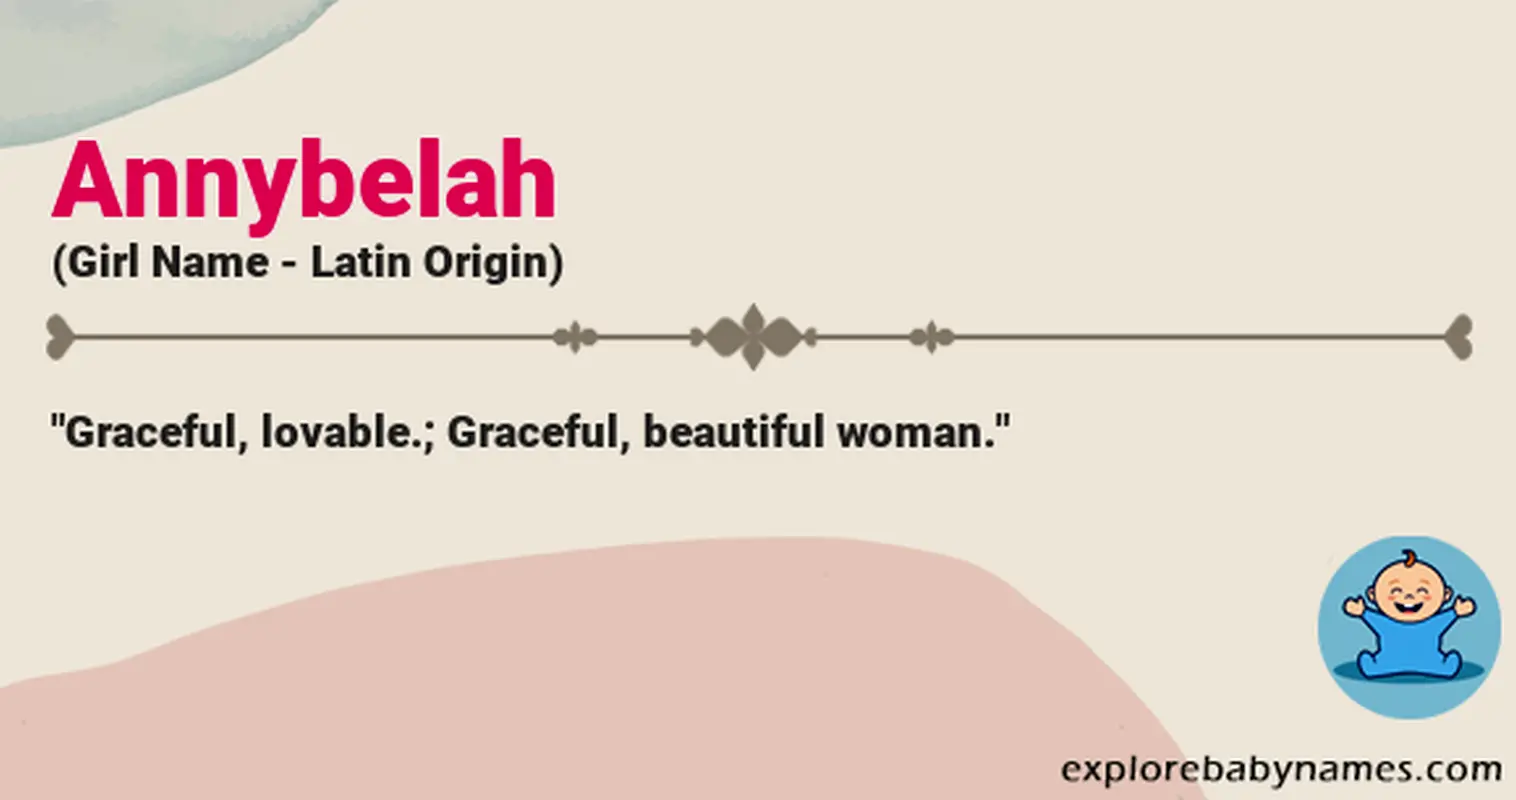 Meaning of Annybelah